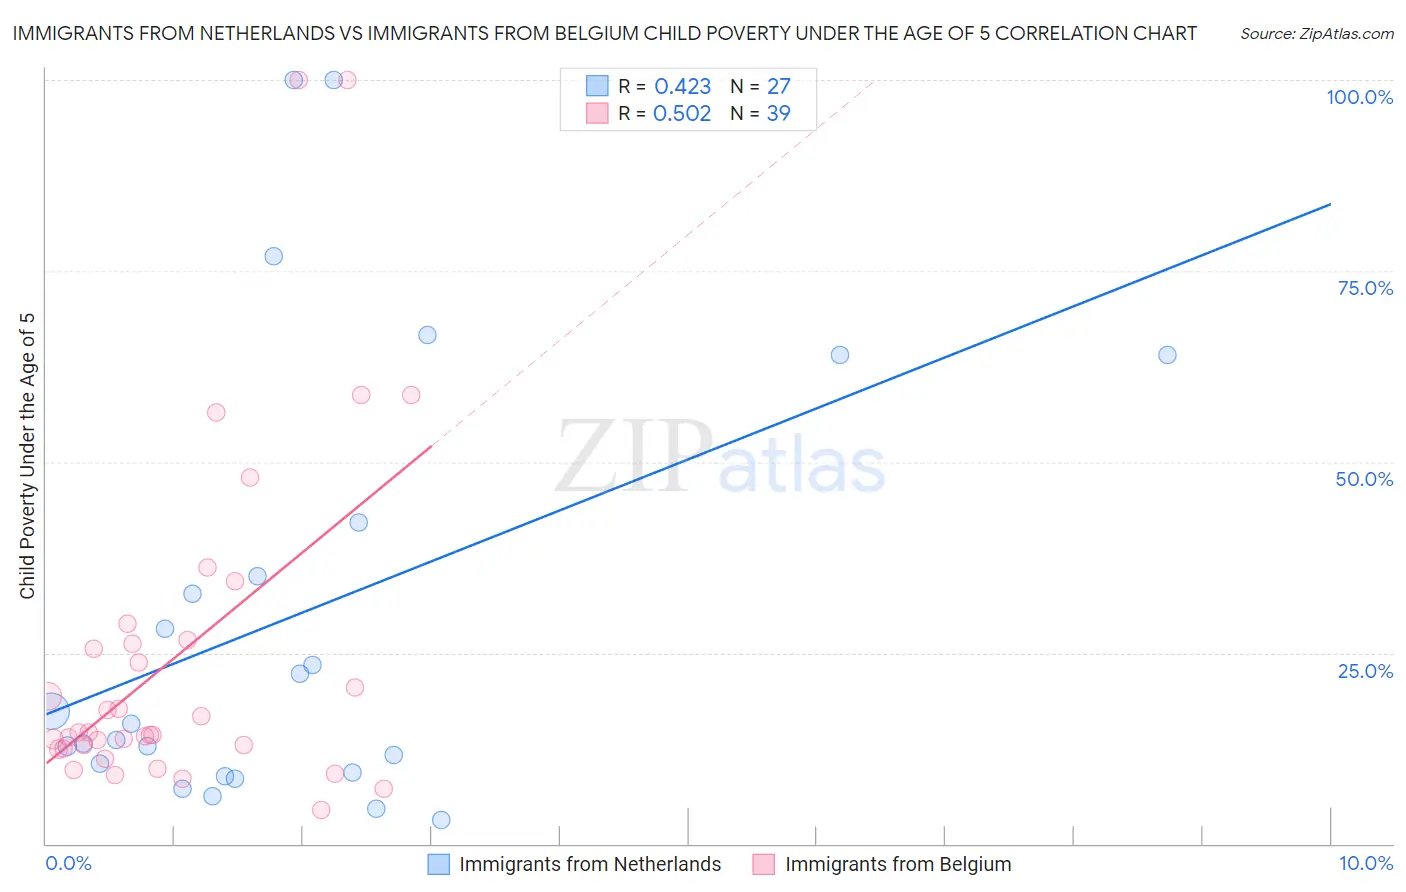 Immigrants from Netherlands vs Immigrants from Belgium Child Poverty Under the Age of 5